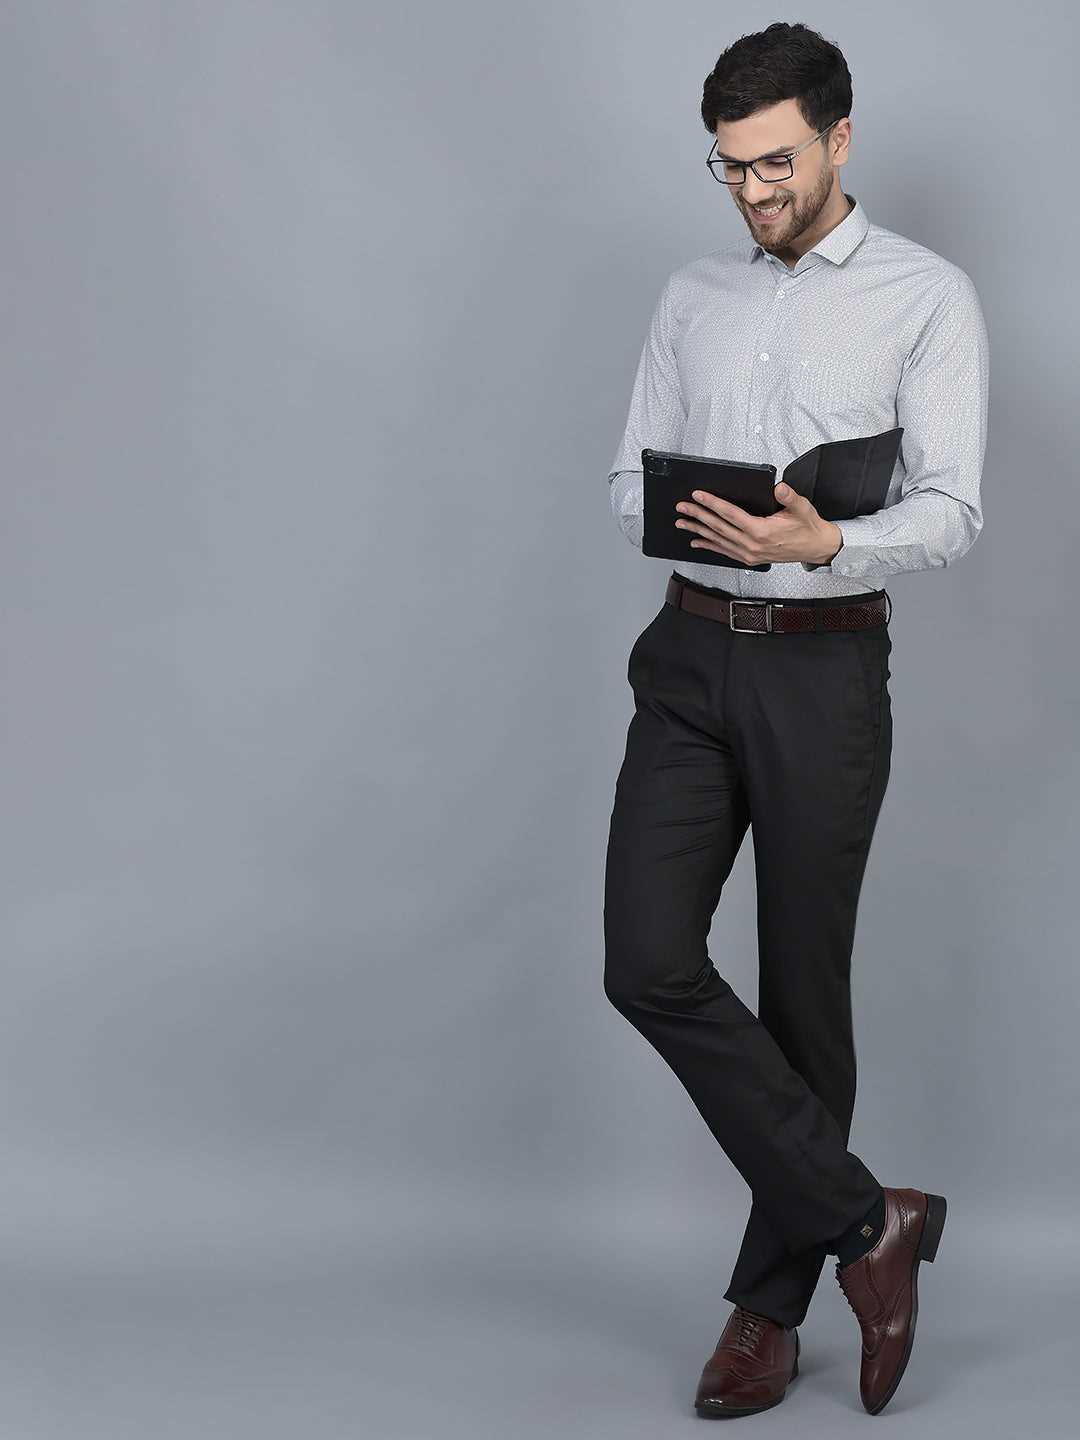 What are the best formal dress ideas with chinos? - Quora